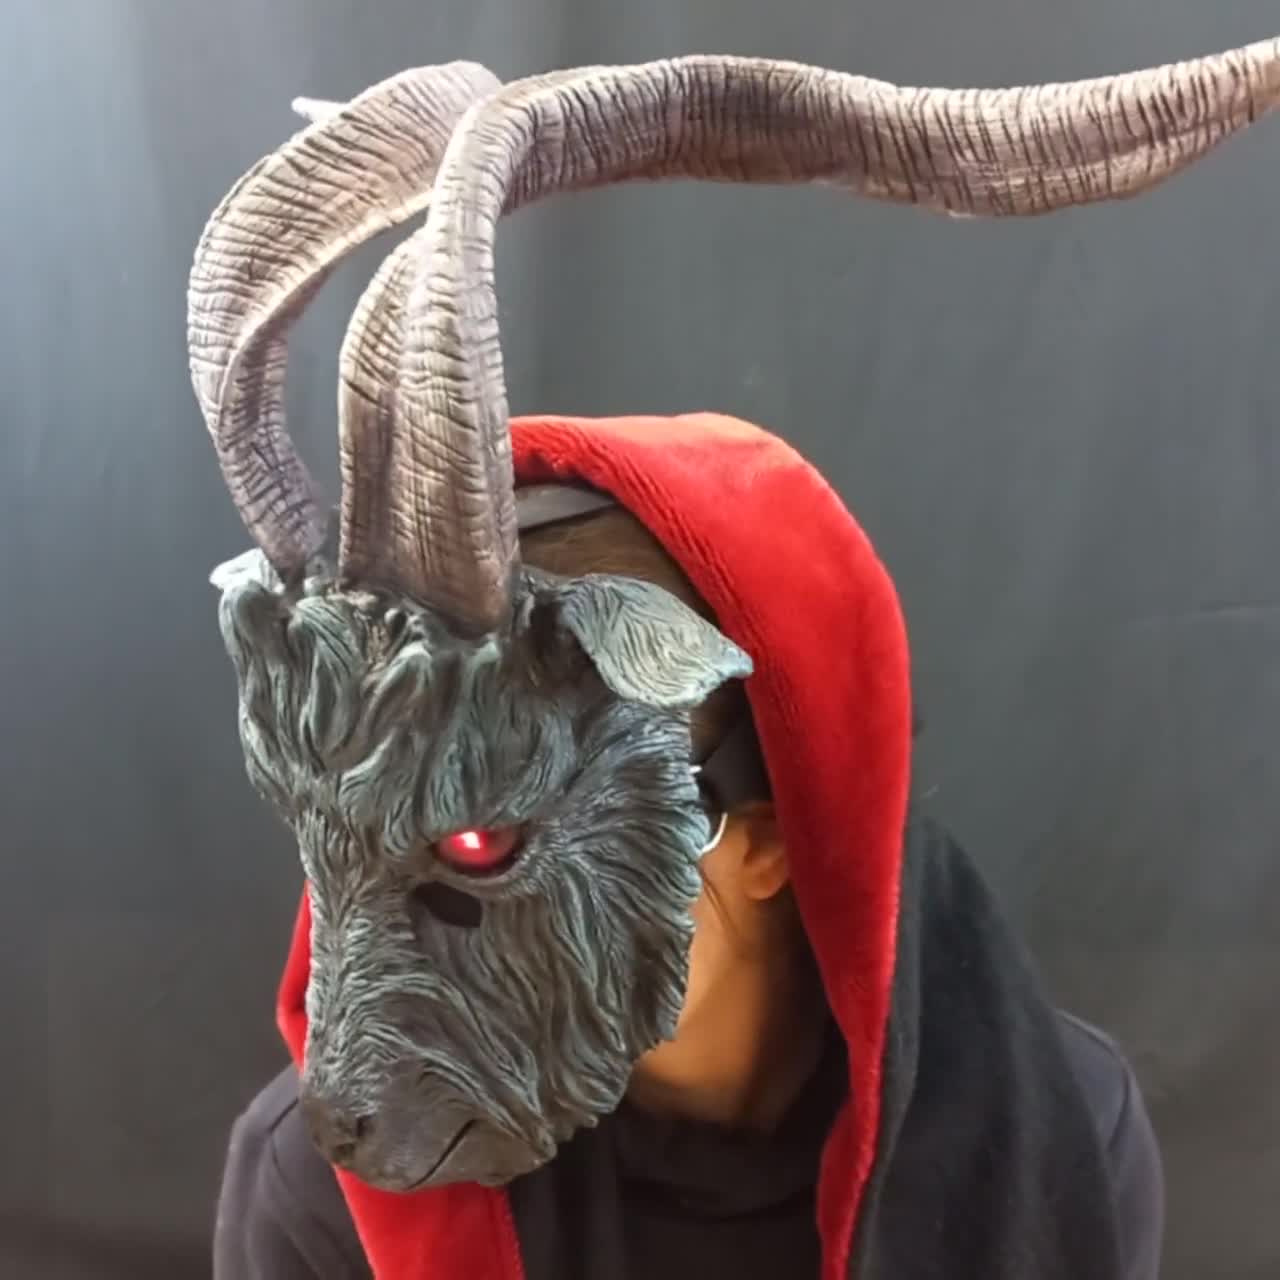 A couple Baphomet masks I made out of paper mache : r/crafts